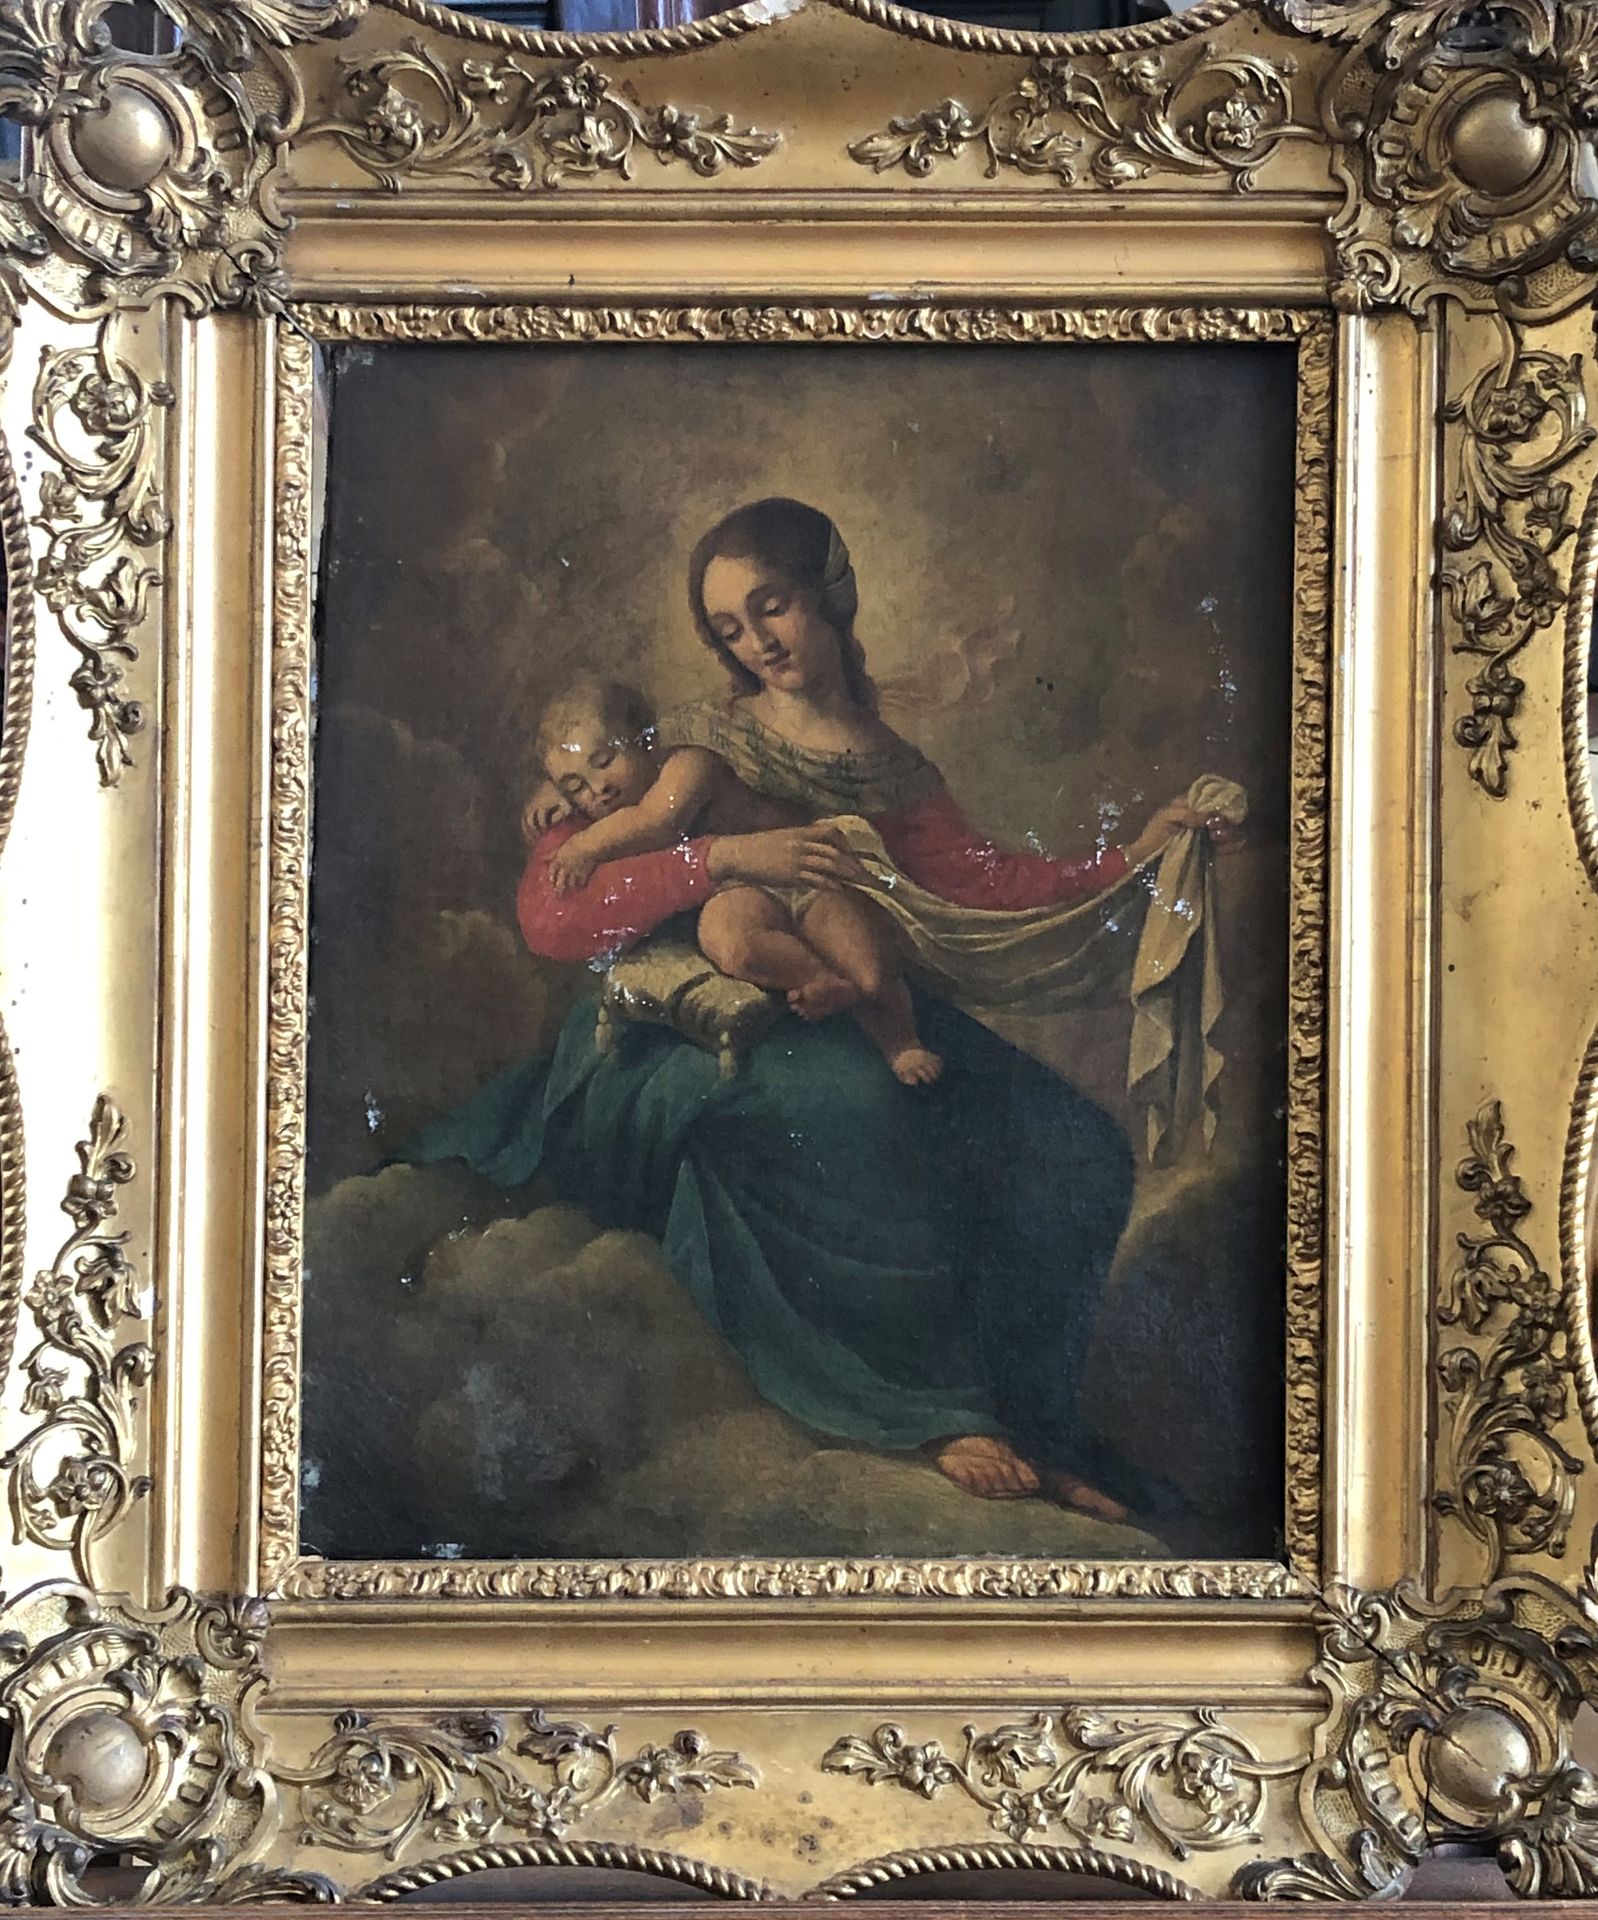 Null French or Italian school 18th century

Virgin and child. 

Oil on canvas.

&hellip;